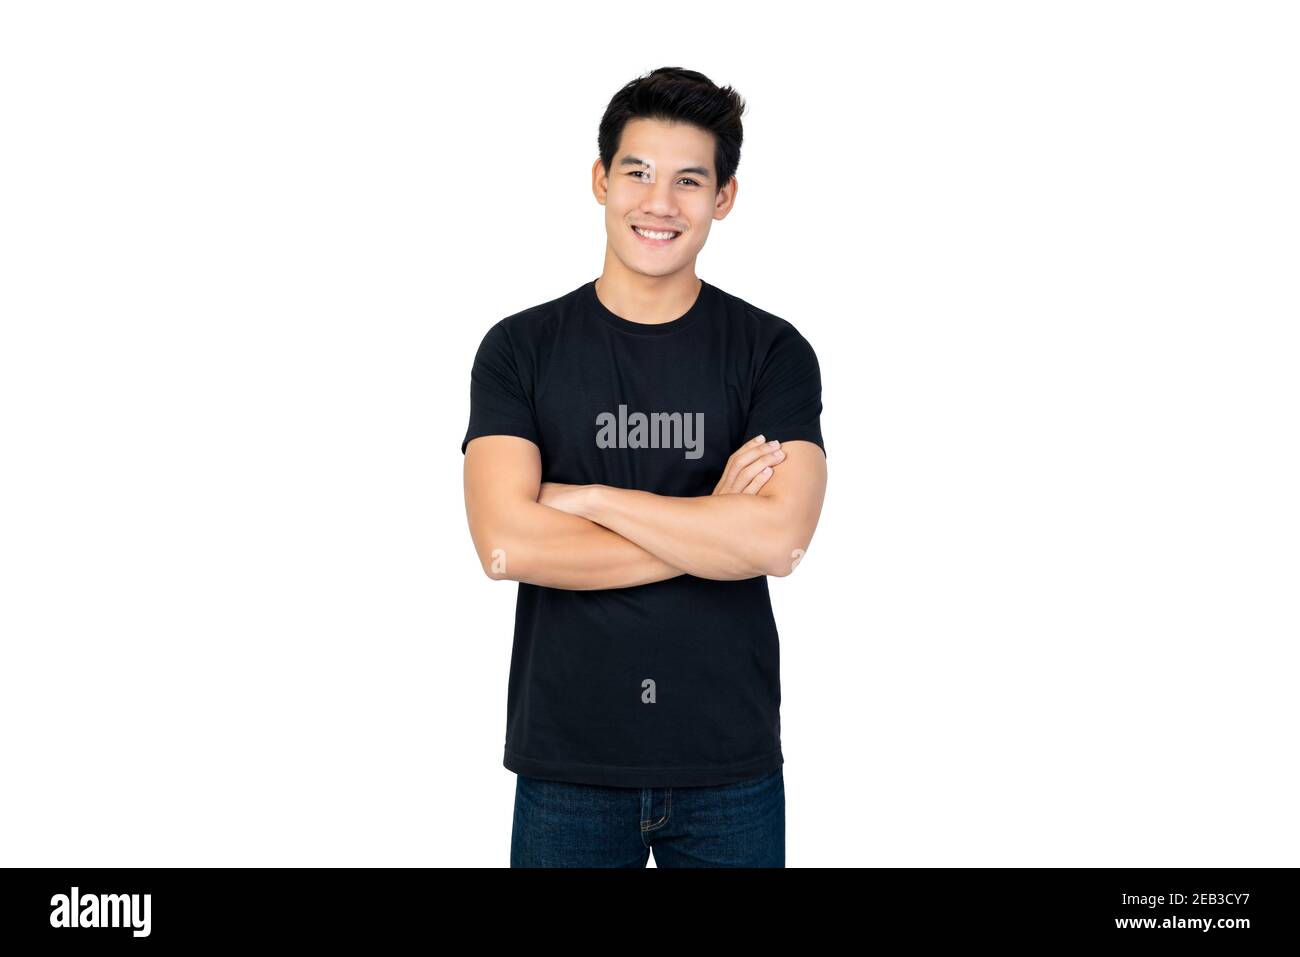 Smiling handsome Asian man in casual black t-shirt with arm crossed looking at camera studio shot isolated on white background Stock Photo